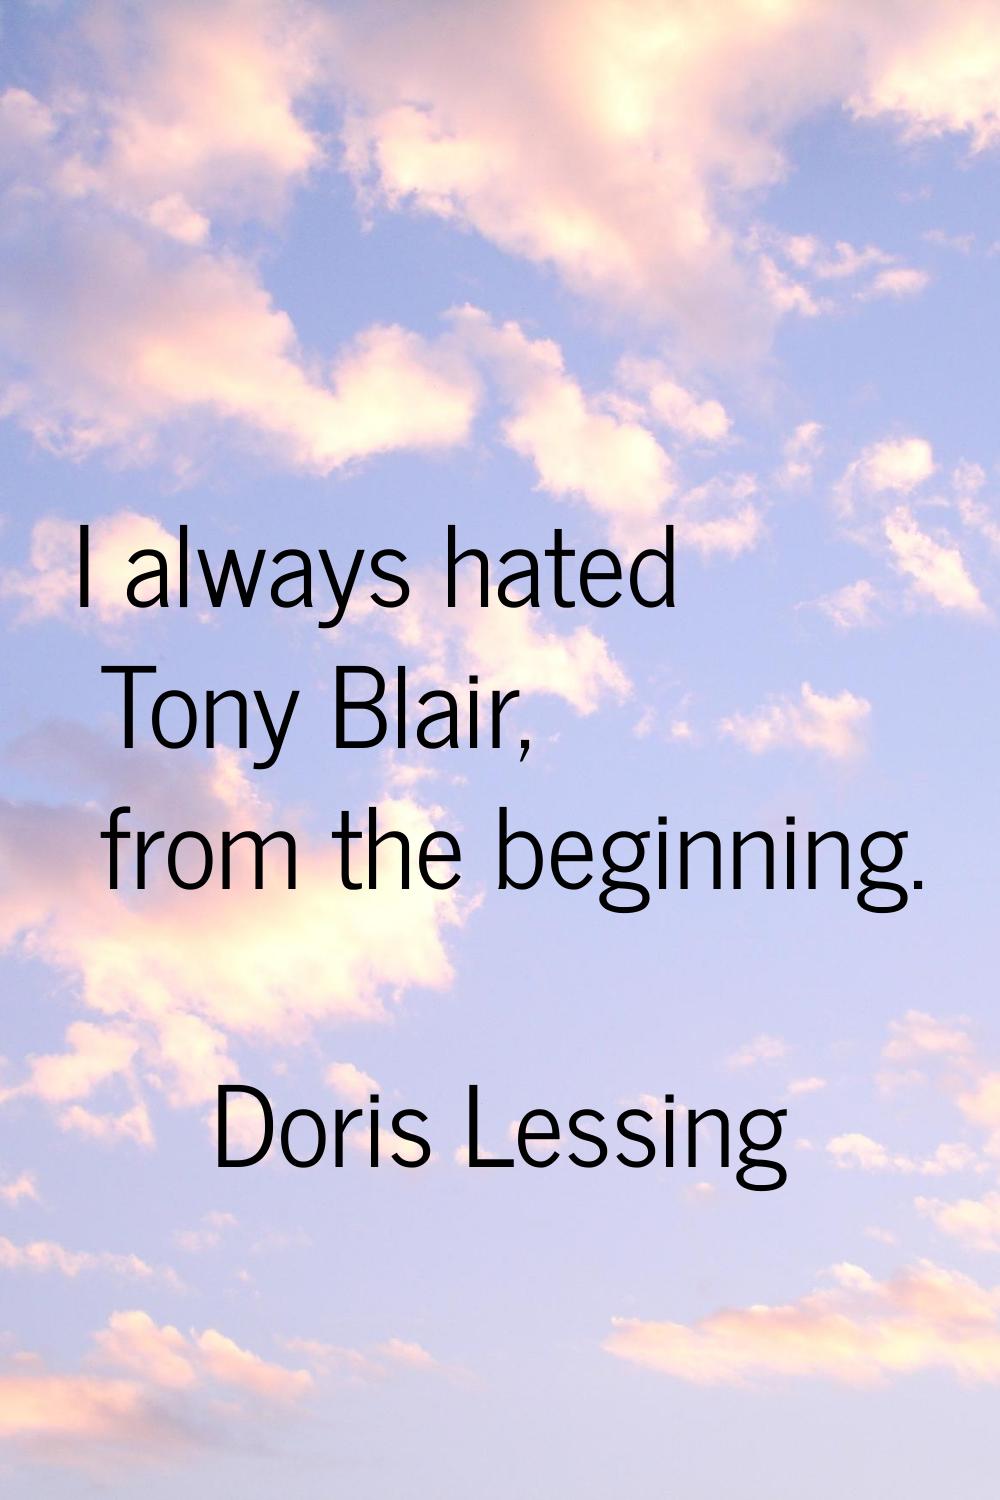 I always hated Tony Blair, from the beginning.